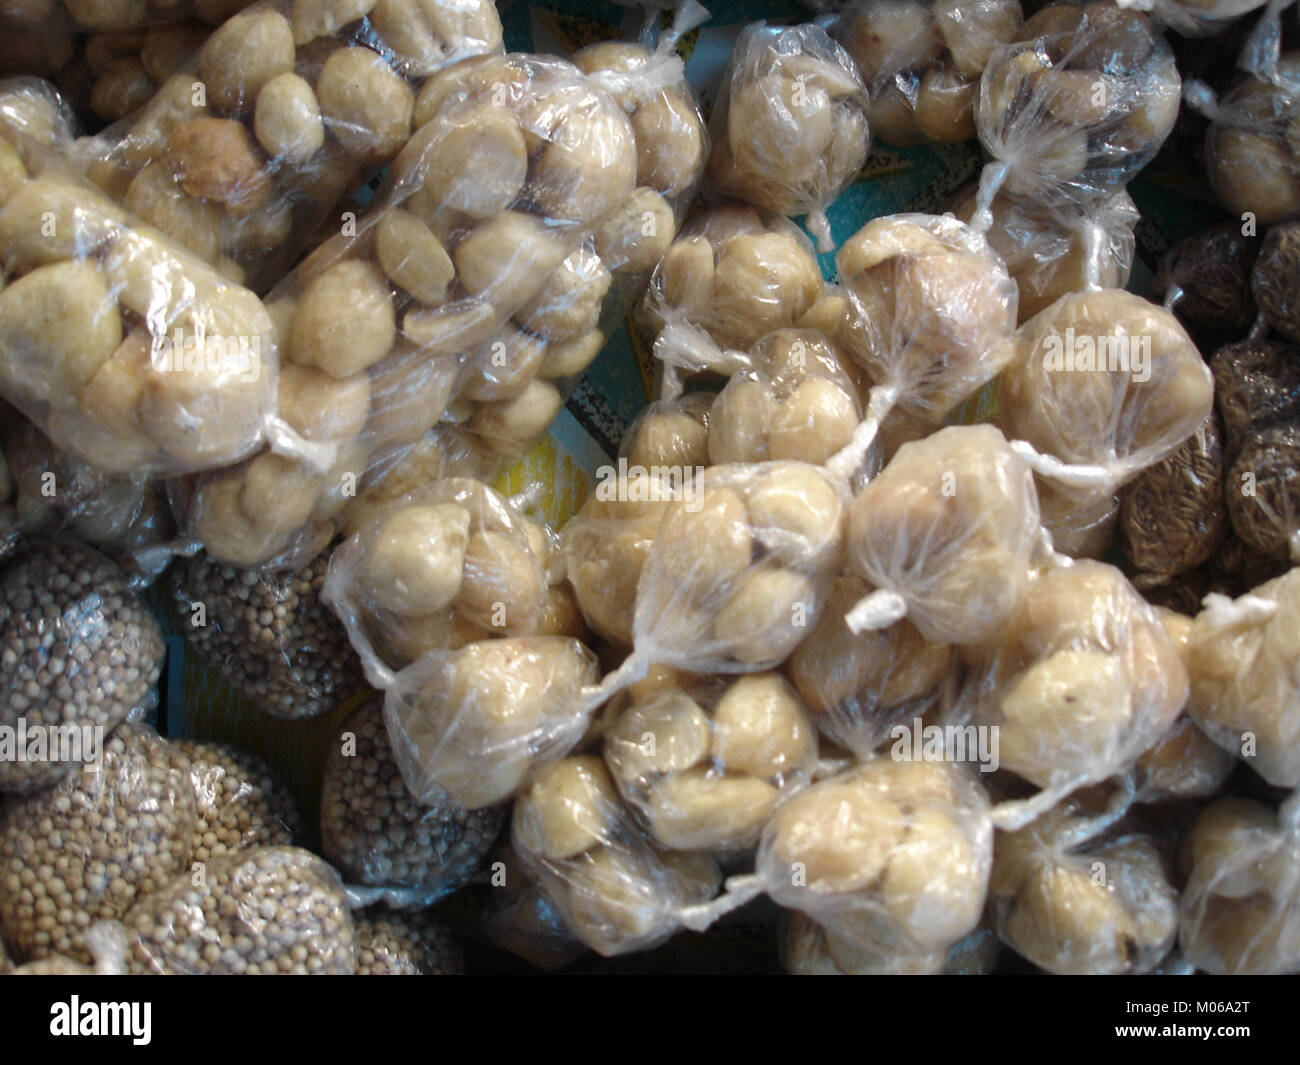 Candlenuts (Aleurites moluccana) marketed Stock Photo